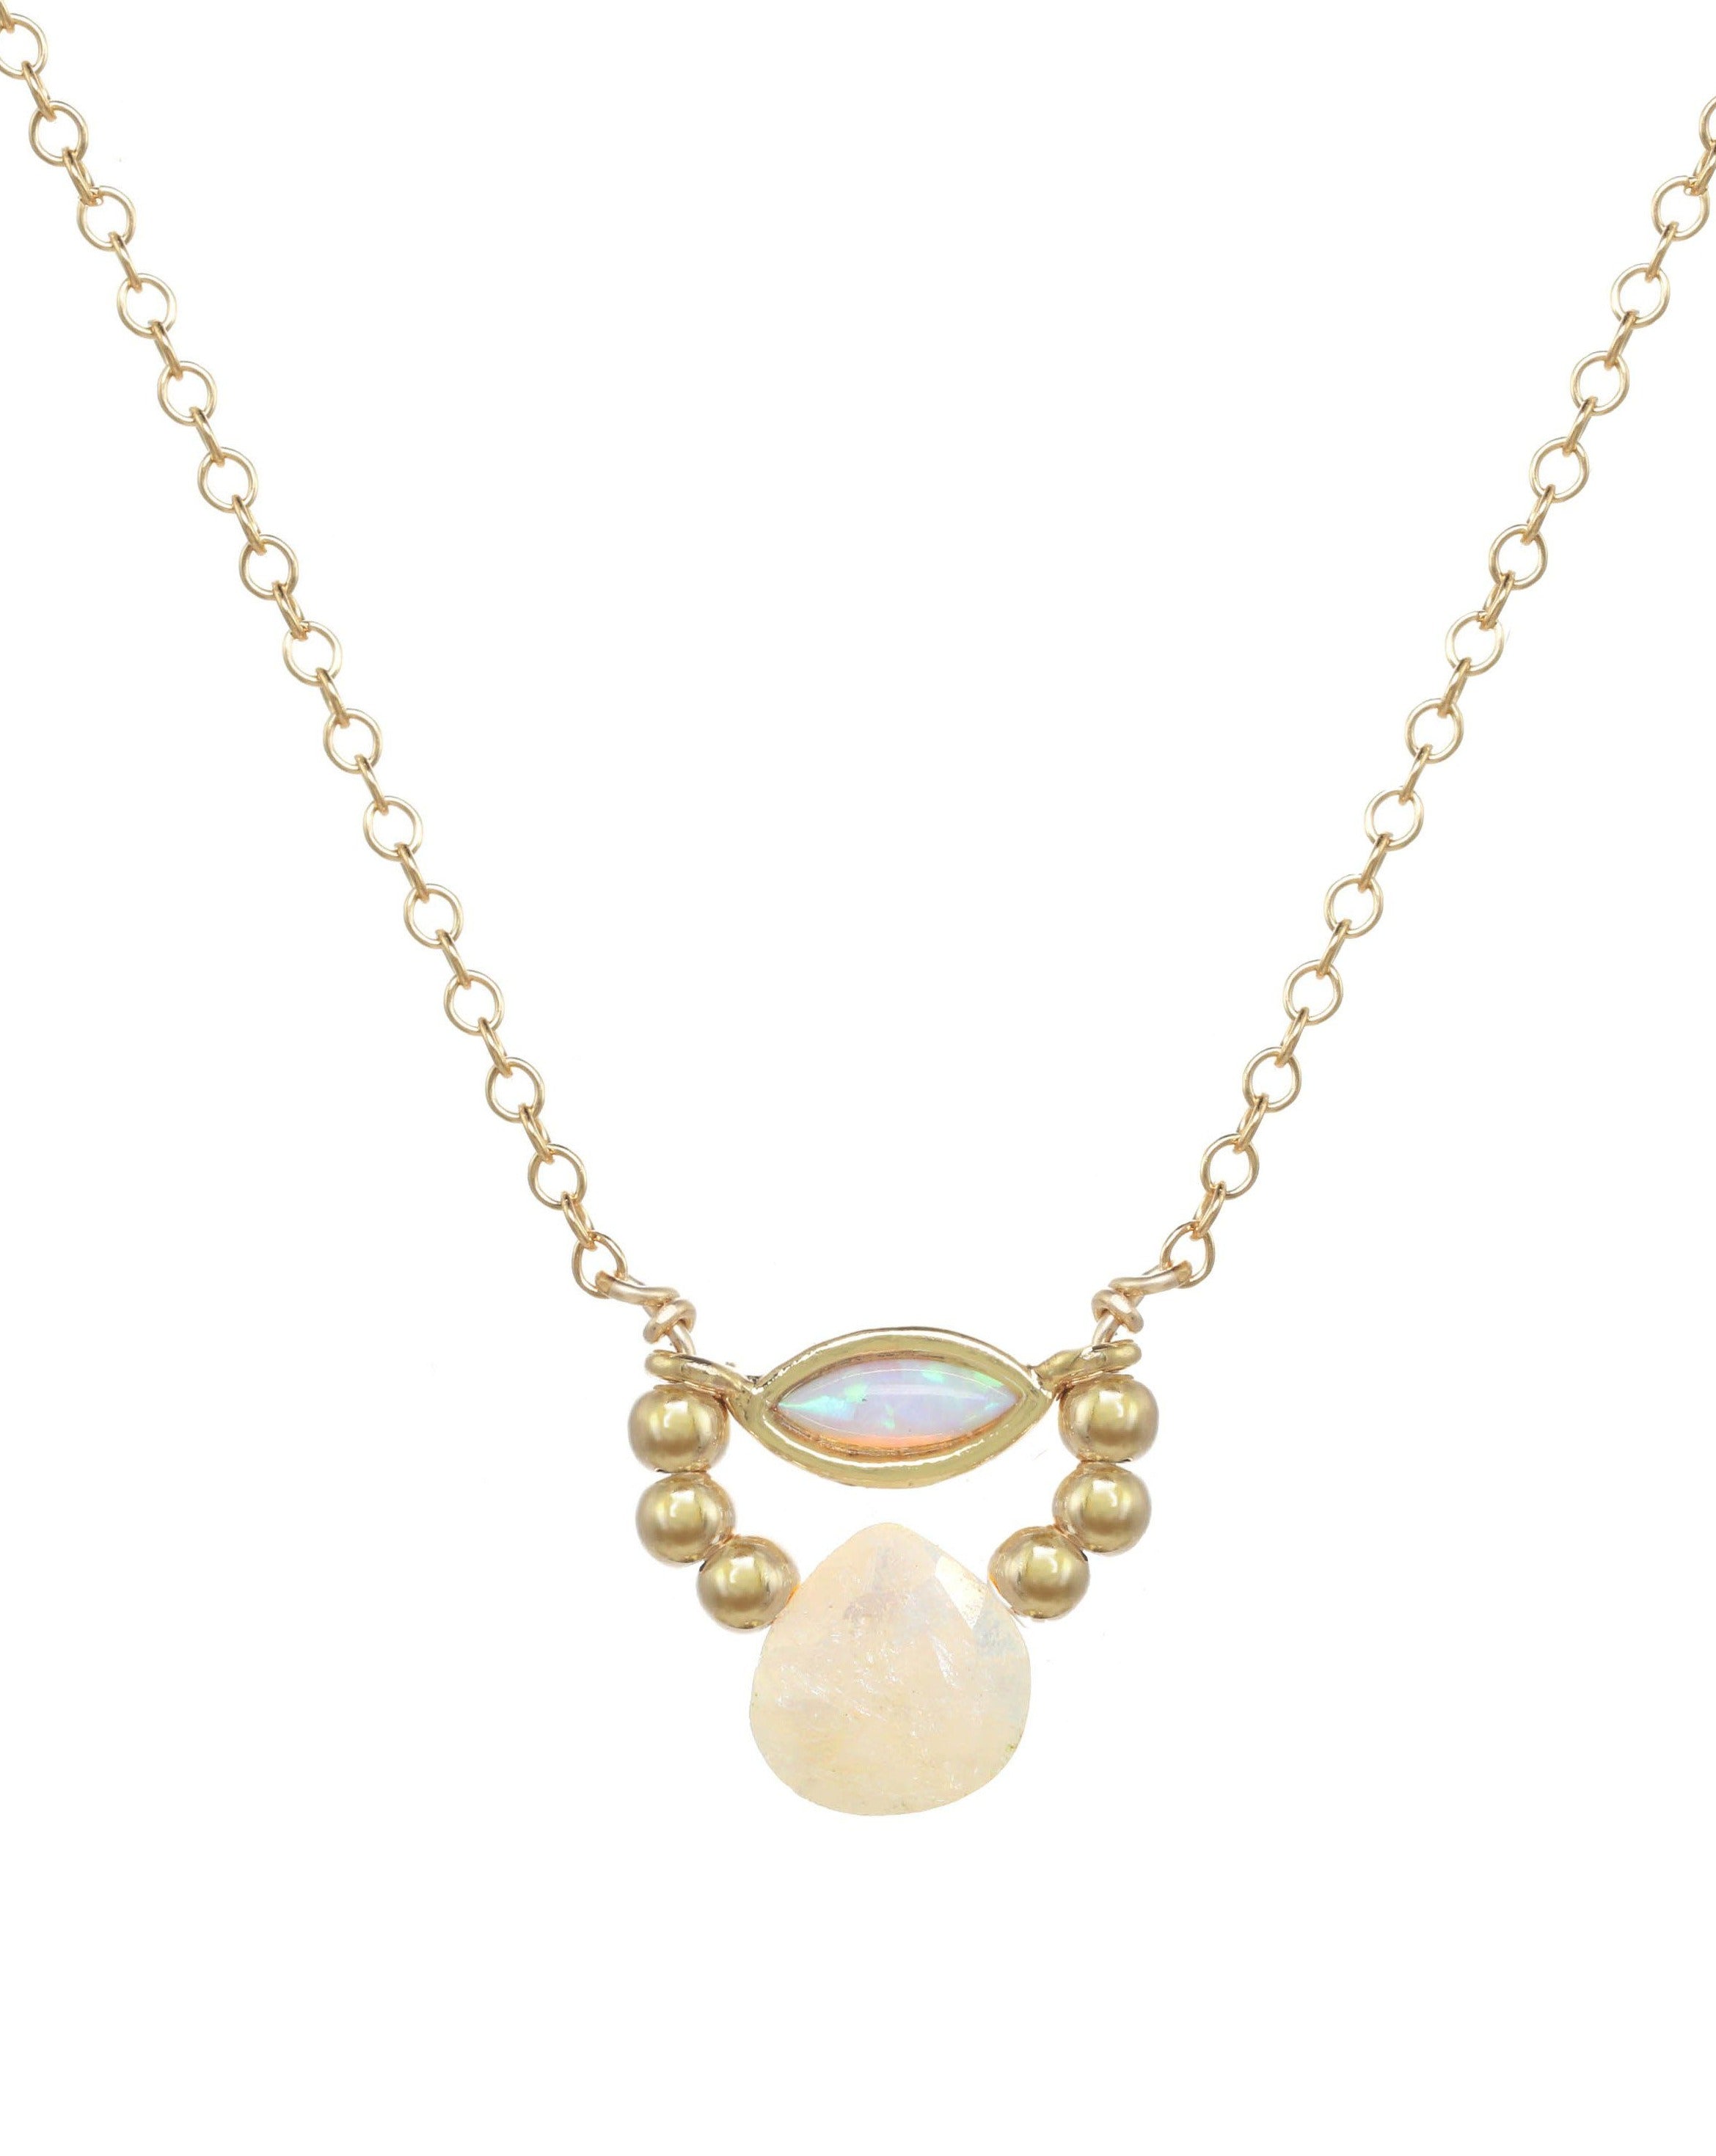 Amara Necklace by KOZAKH. A 16 to 18 inch adjustable length  necklace in 14K Gold Filled, featuring a Marquise Opal charm, 2mm Gold Filled balls, and a faceted Silverite.